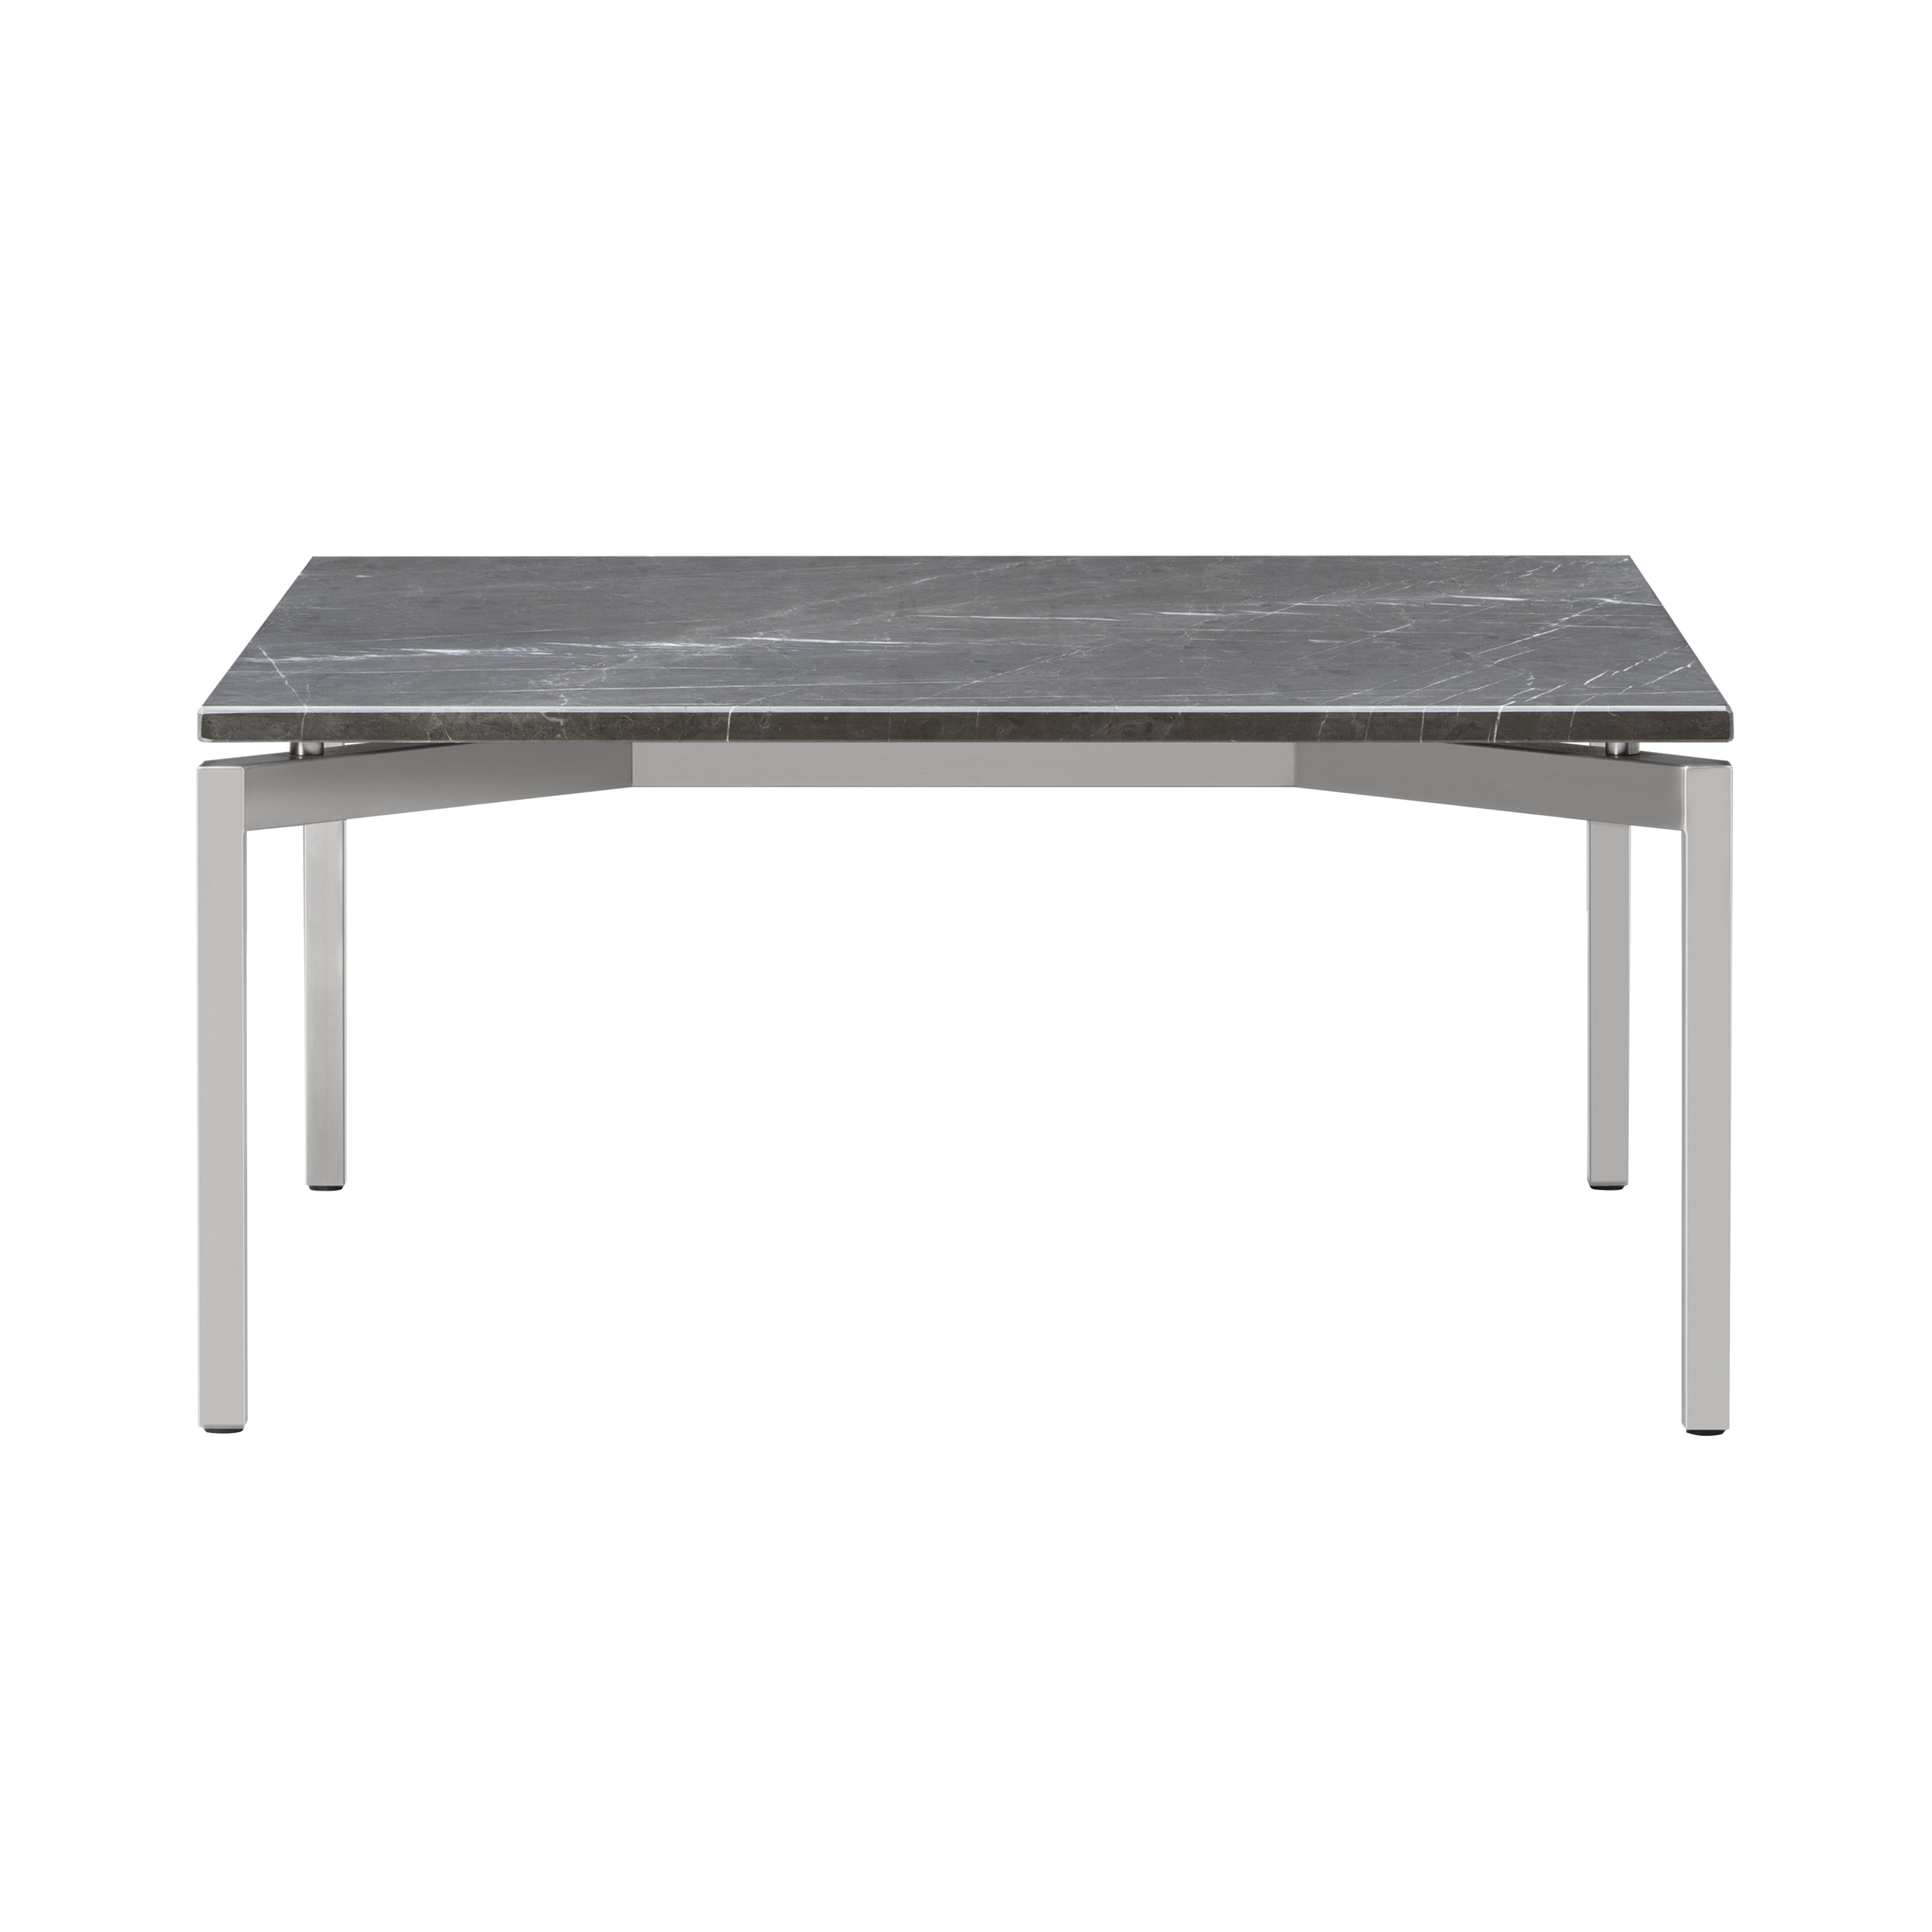 EJ66 Coffee Table: Square + Grey Pietra + Stainless Steel